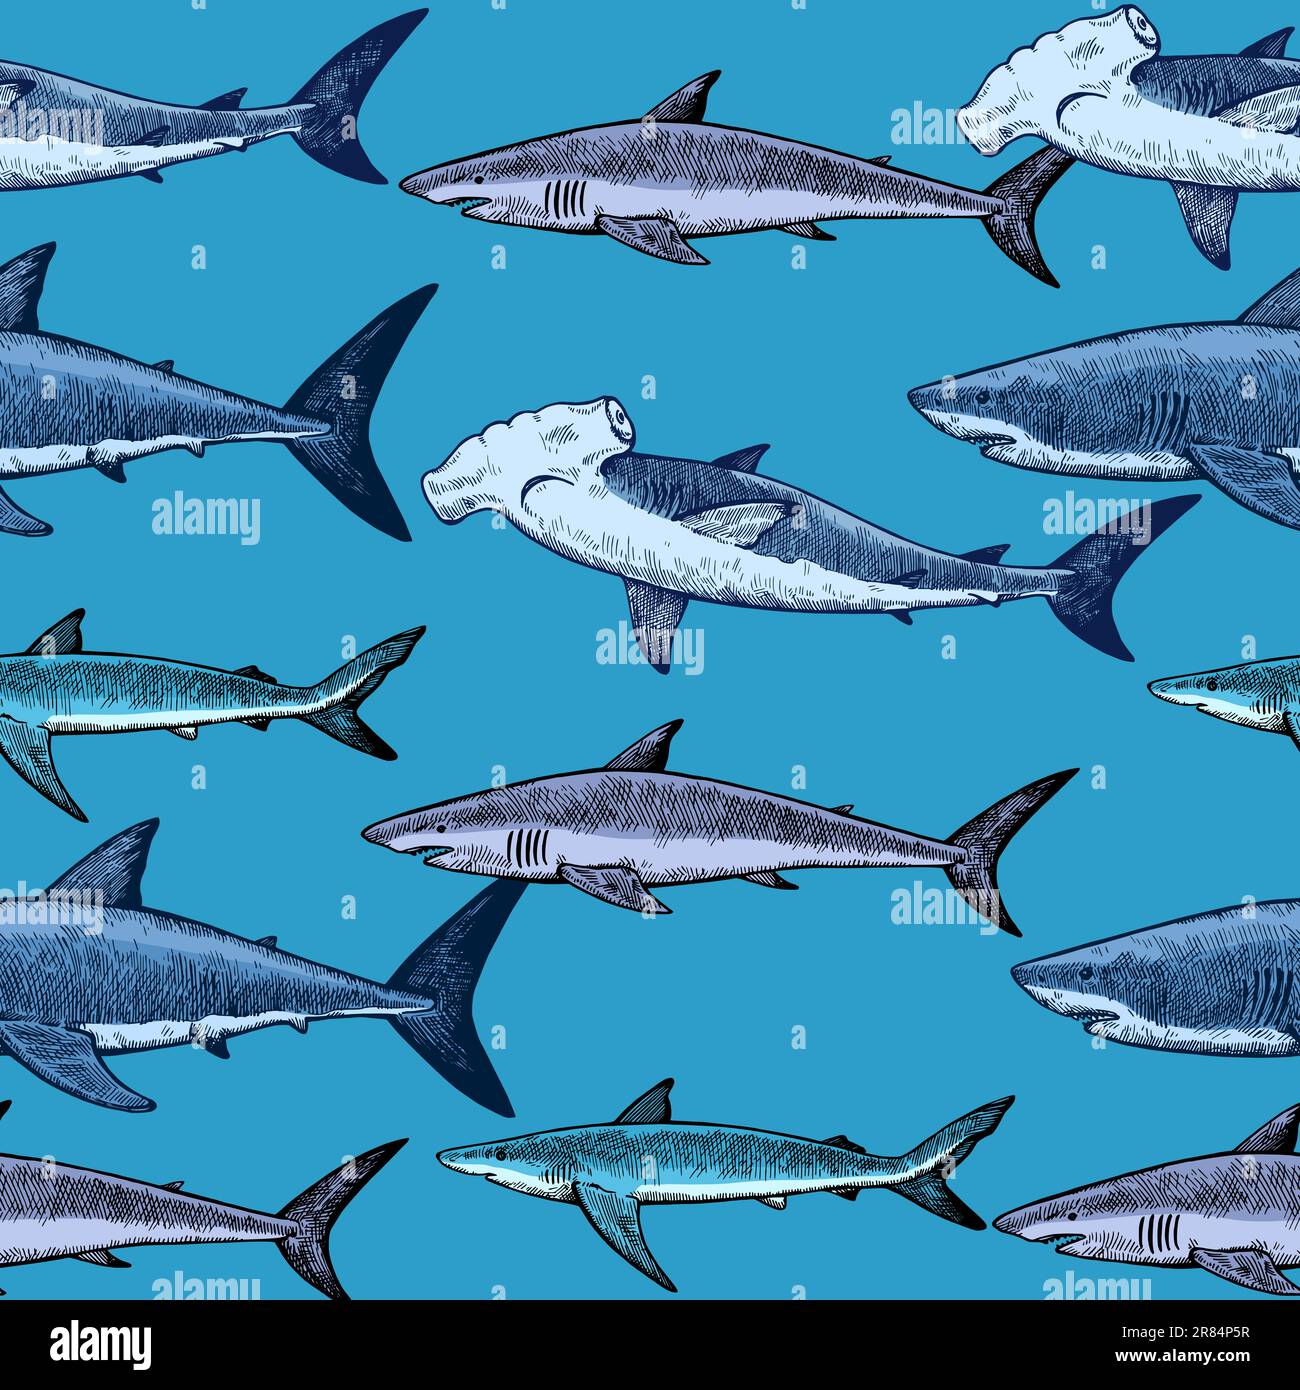 Seamless pattern with various sharks, great white shark, hammerhead shark and other. Vector illustration in engraving vintage style. Stock Vector